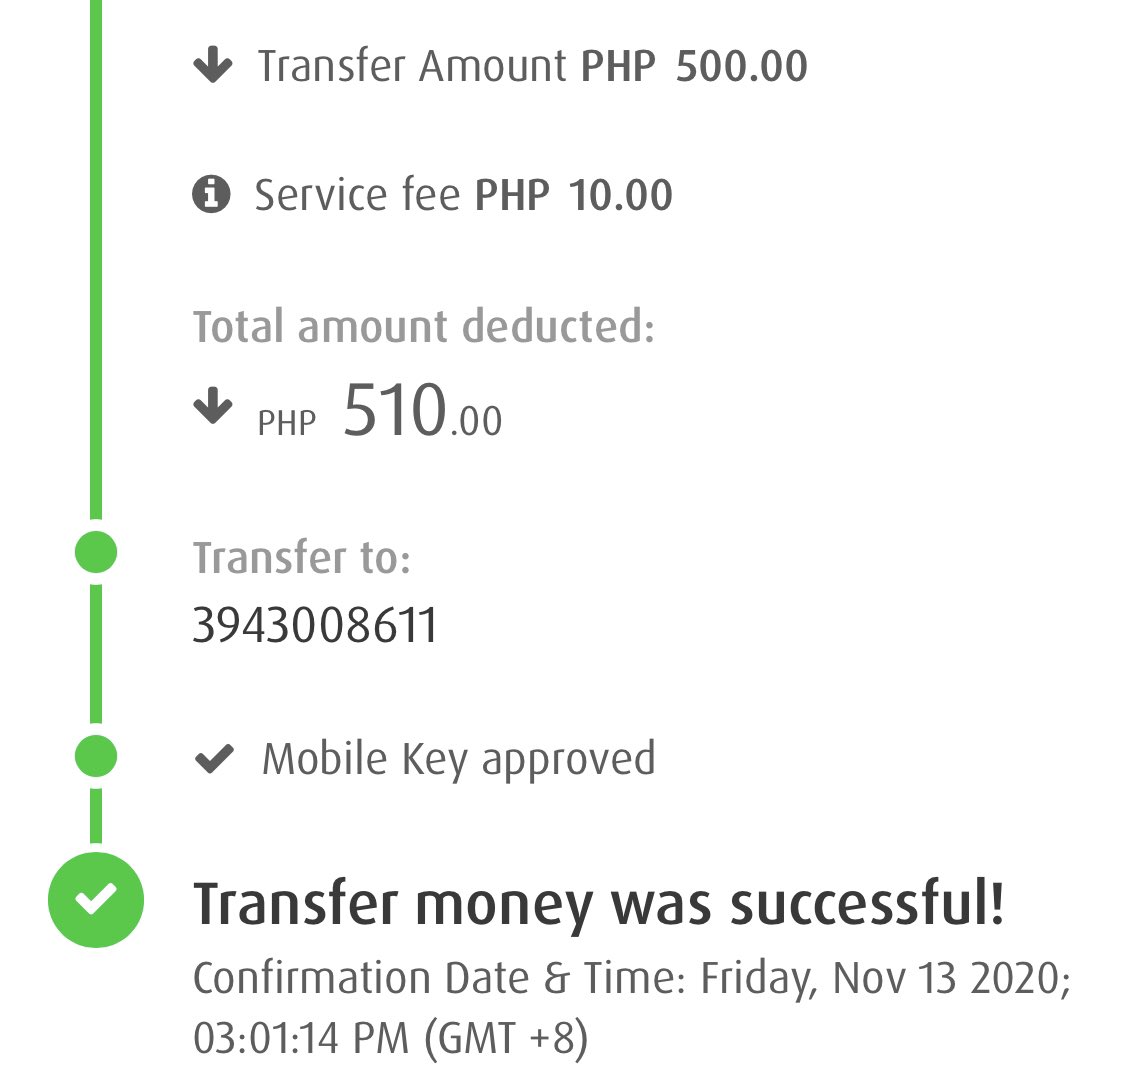 Donated ₱500 to  @PAWSPhilippines, whose disaster response team has been rescuing animals and providing assistance to pet owners in Marikina. Match me.